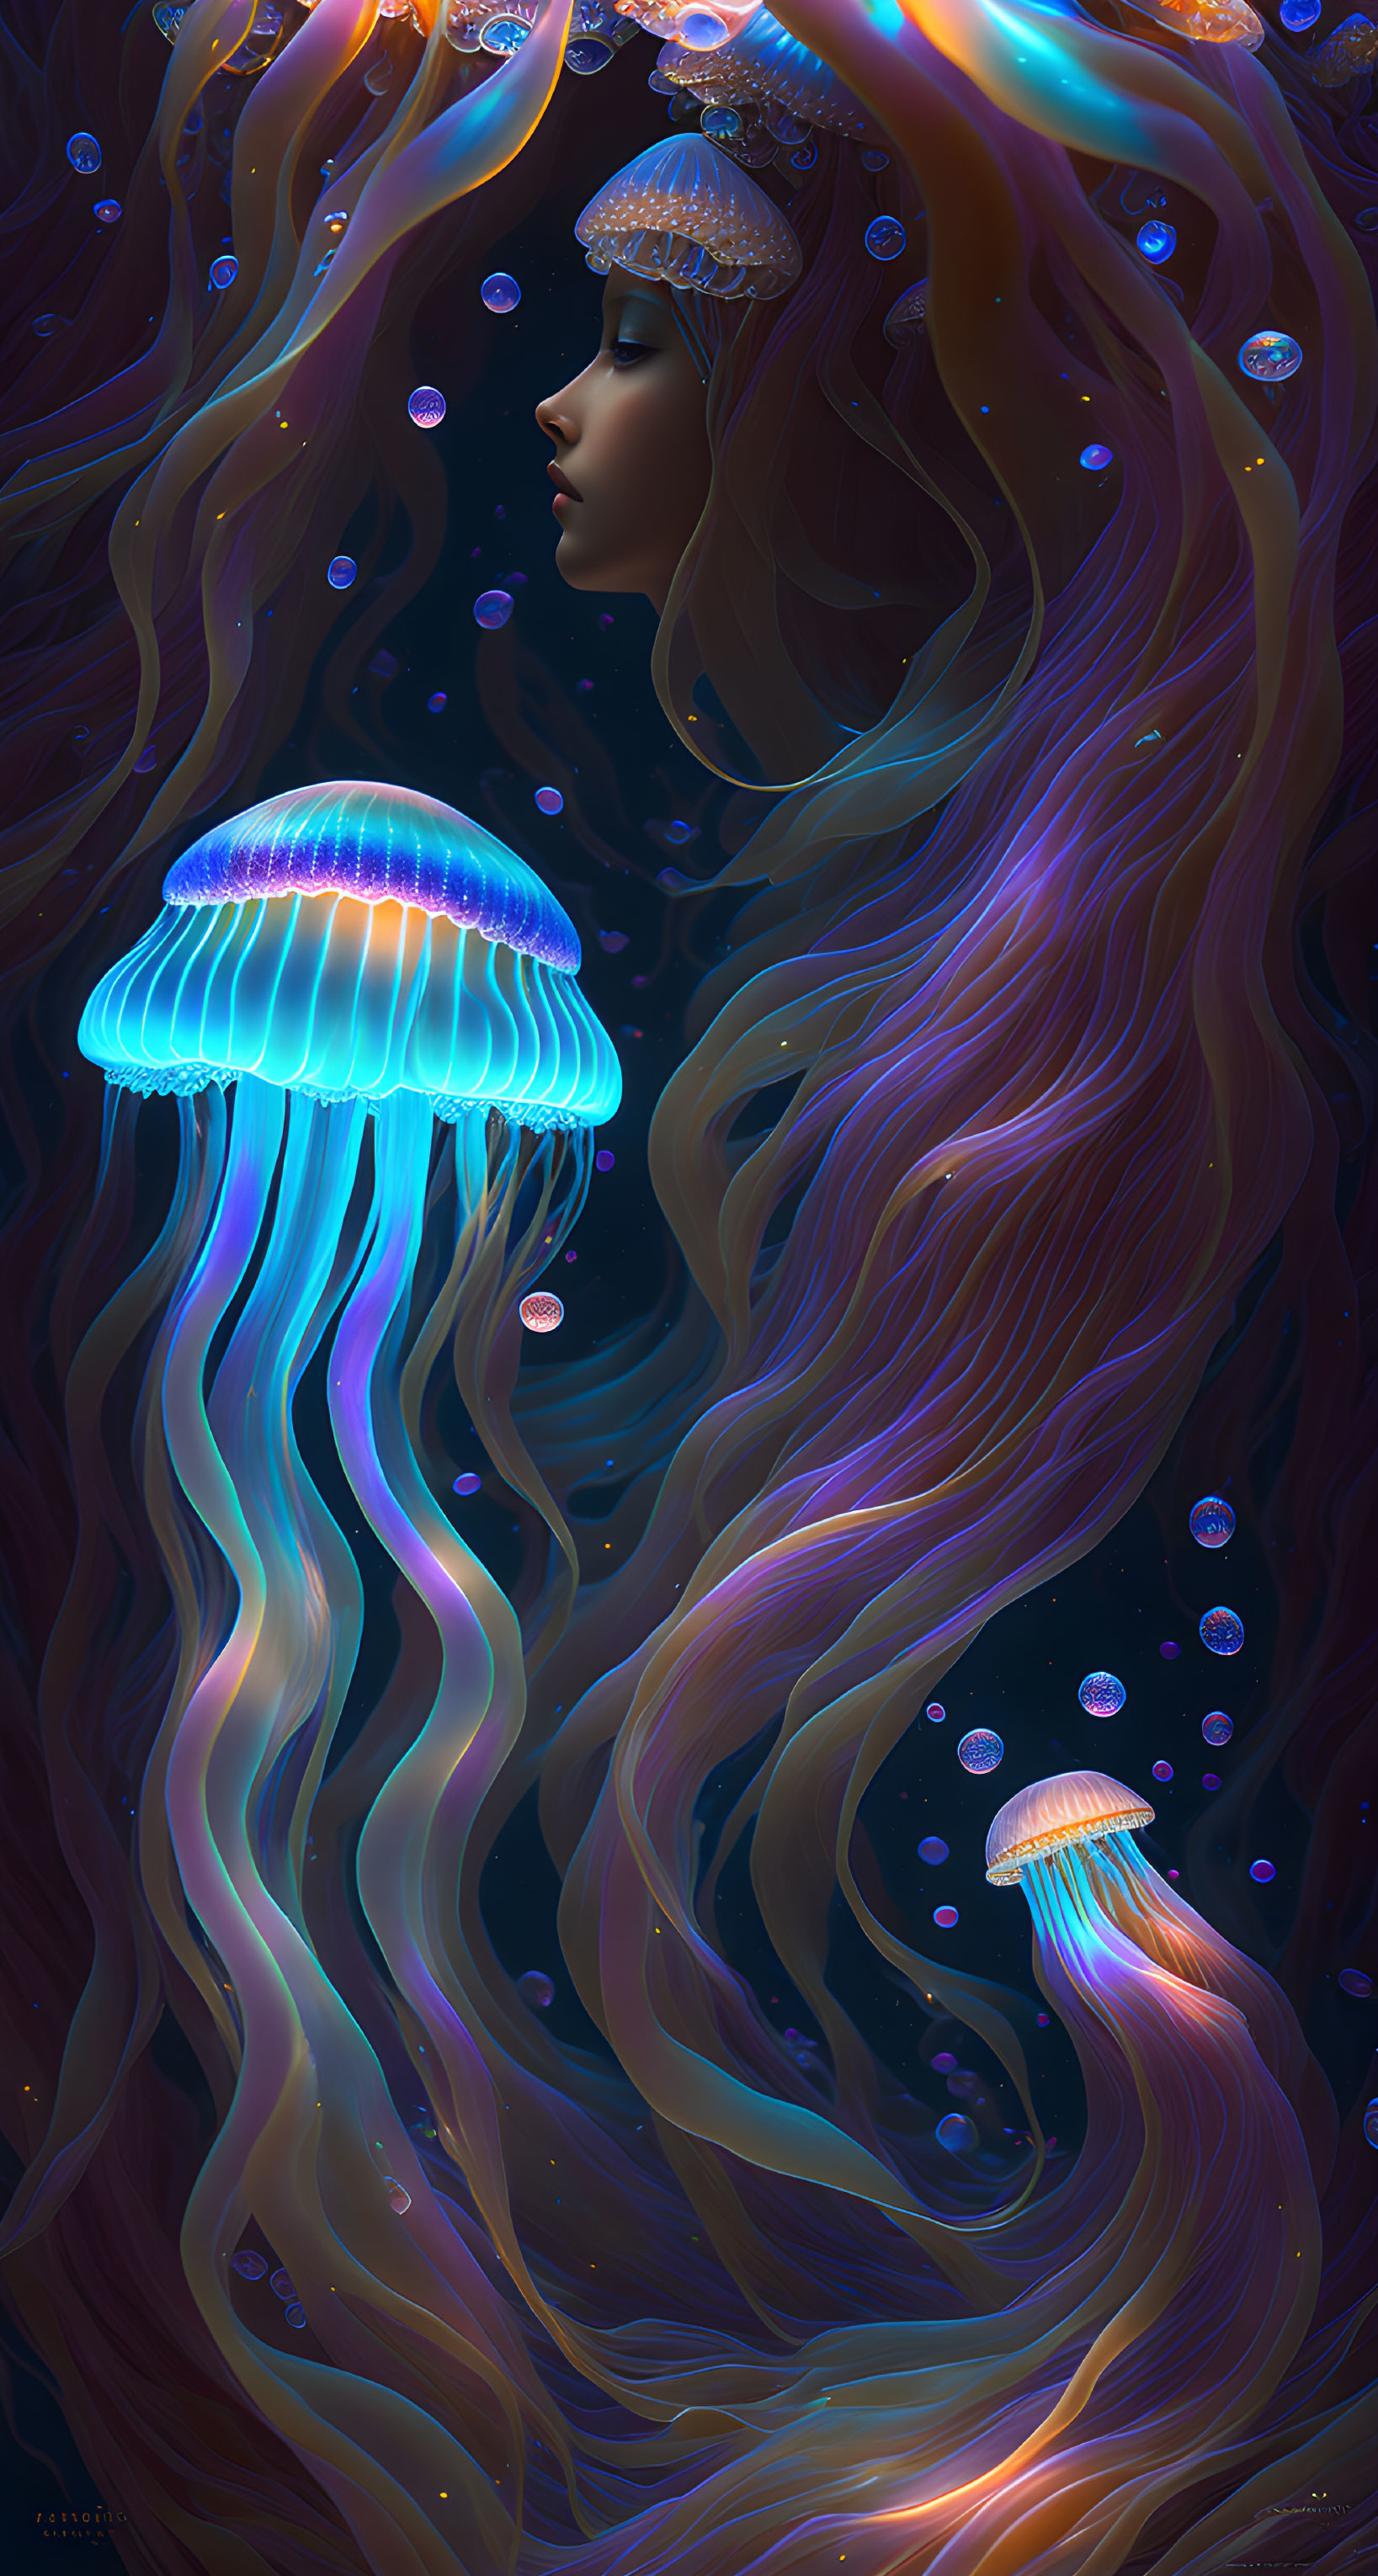 Surreal woman's profile with flowing hair among neon jellyfish and bubbles